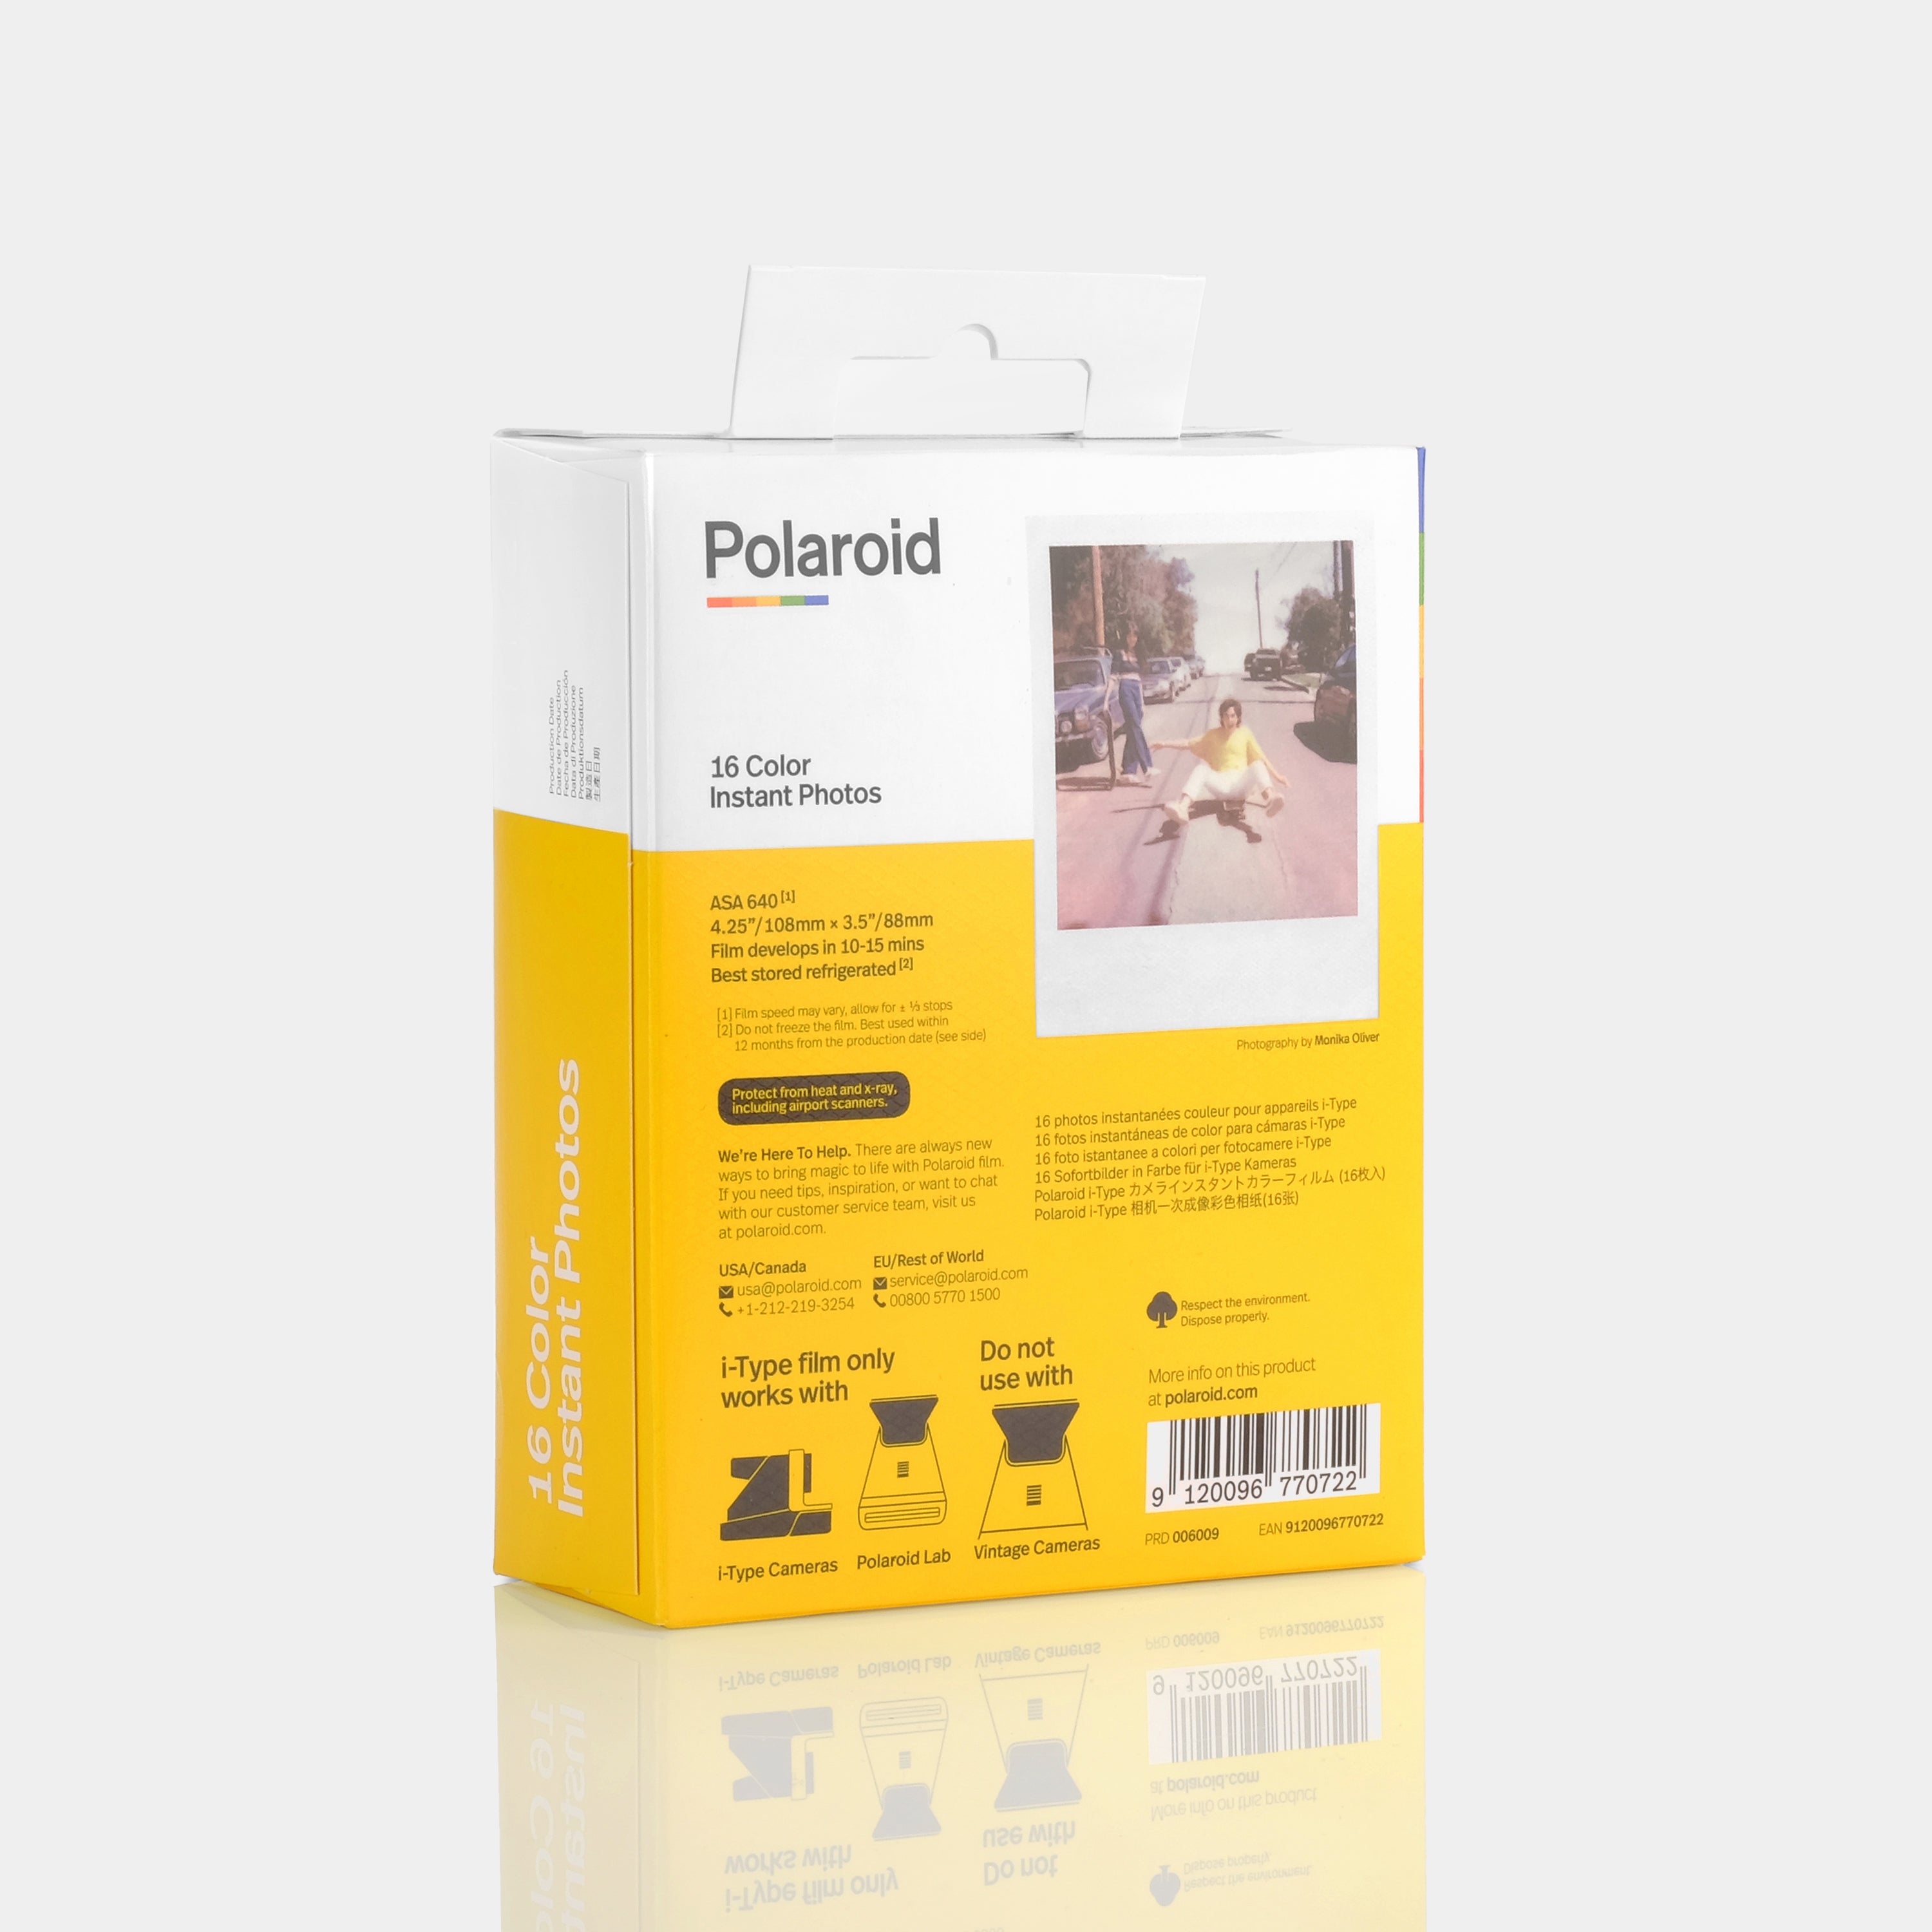 Polaroid Color i-Type Instant Film - Double Pack